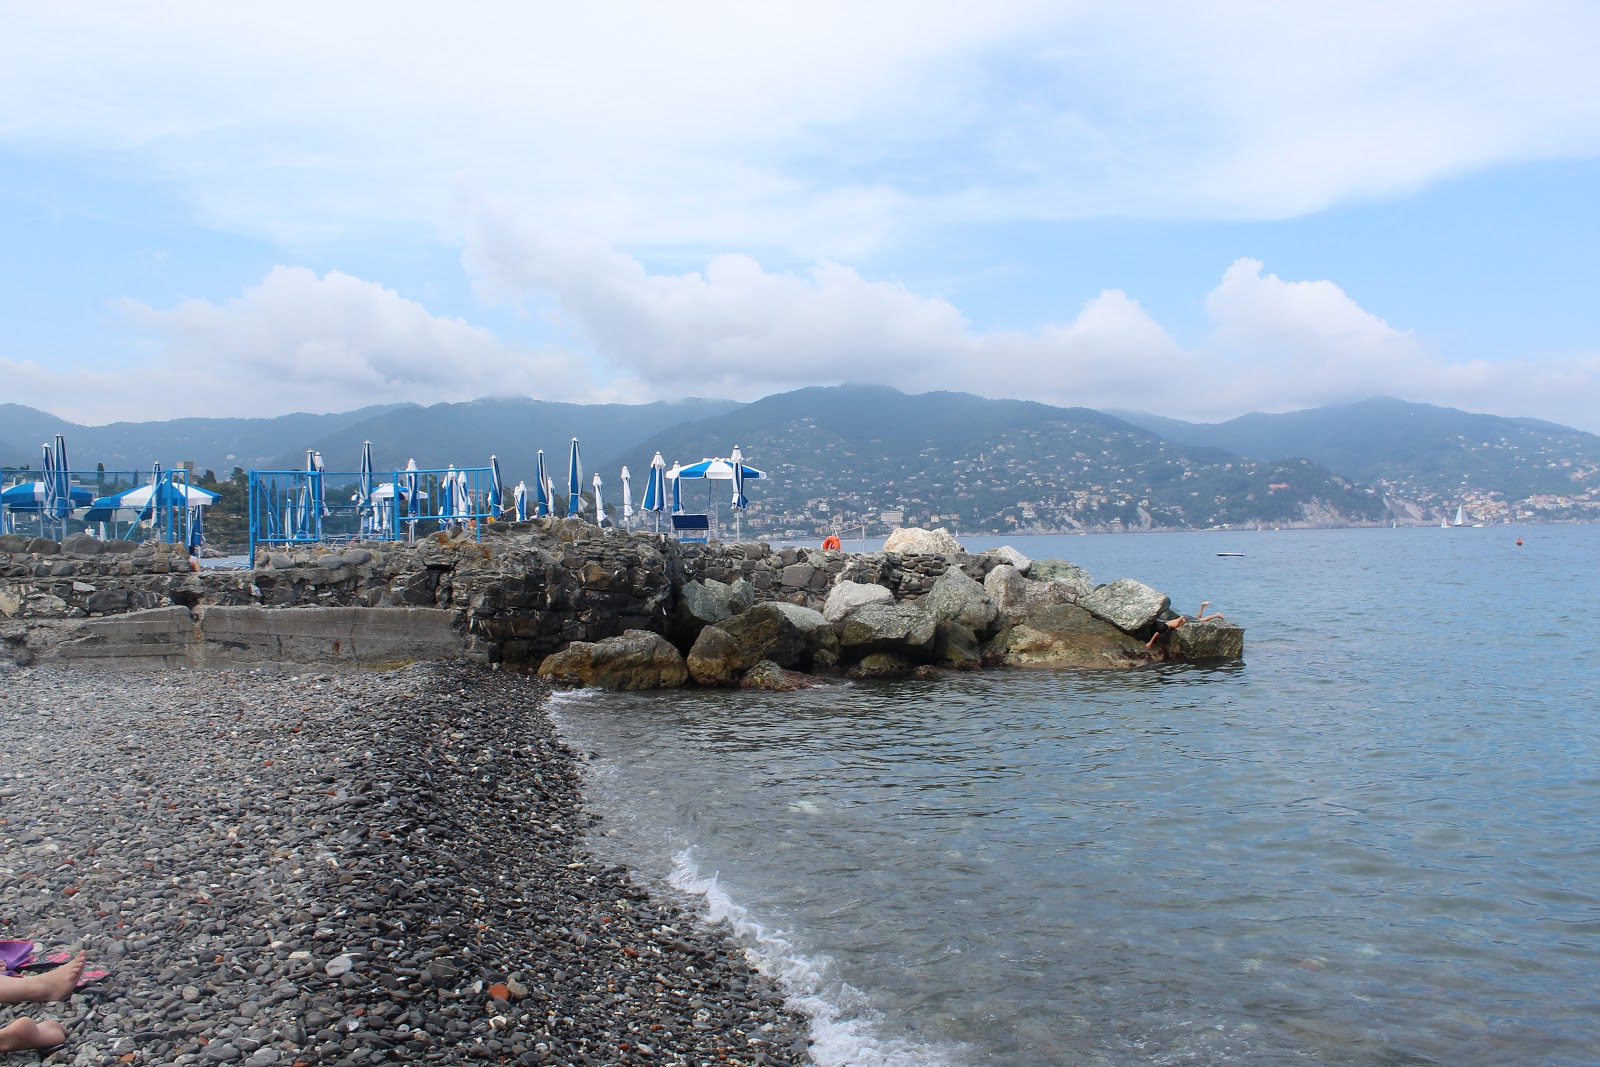 Photo of Spiaggia Santa Margherita Ligure backed by cliffs